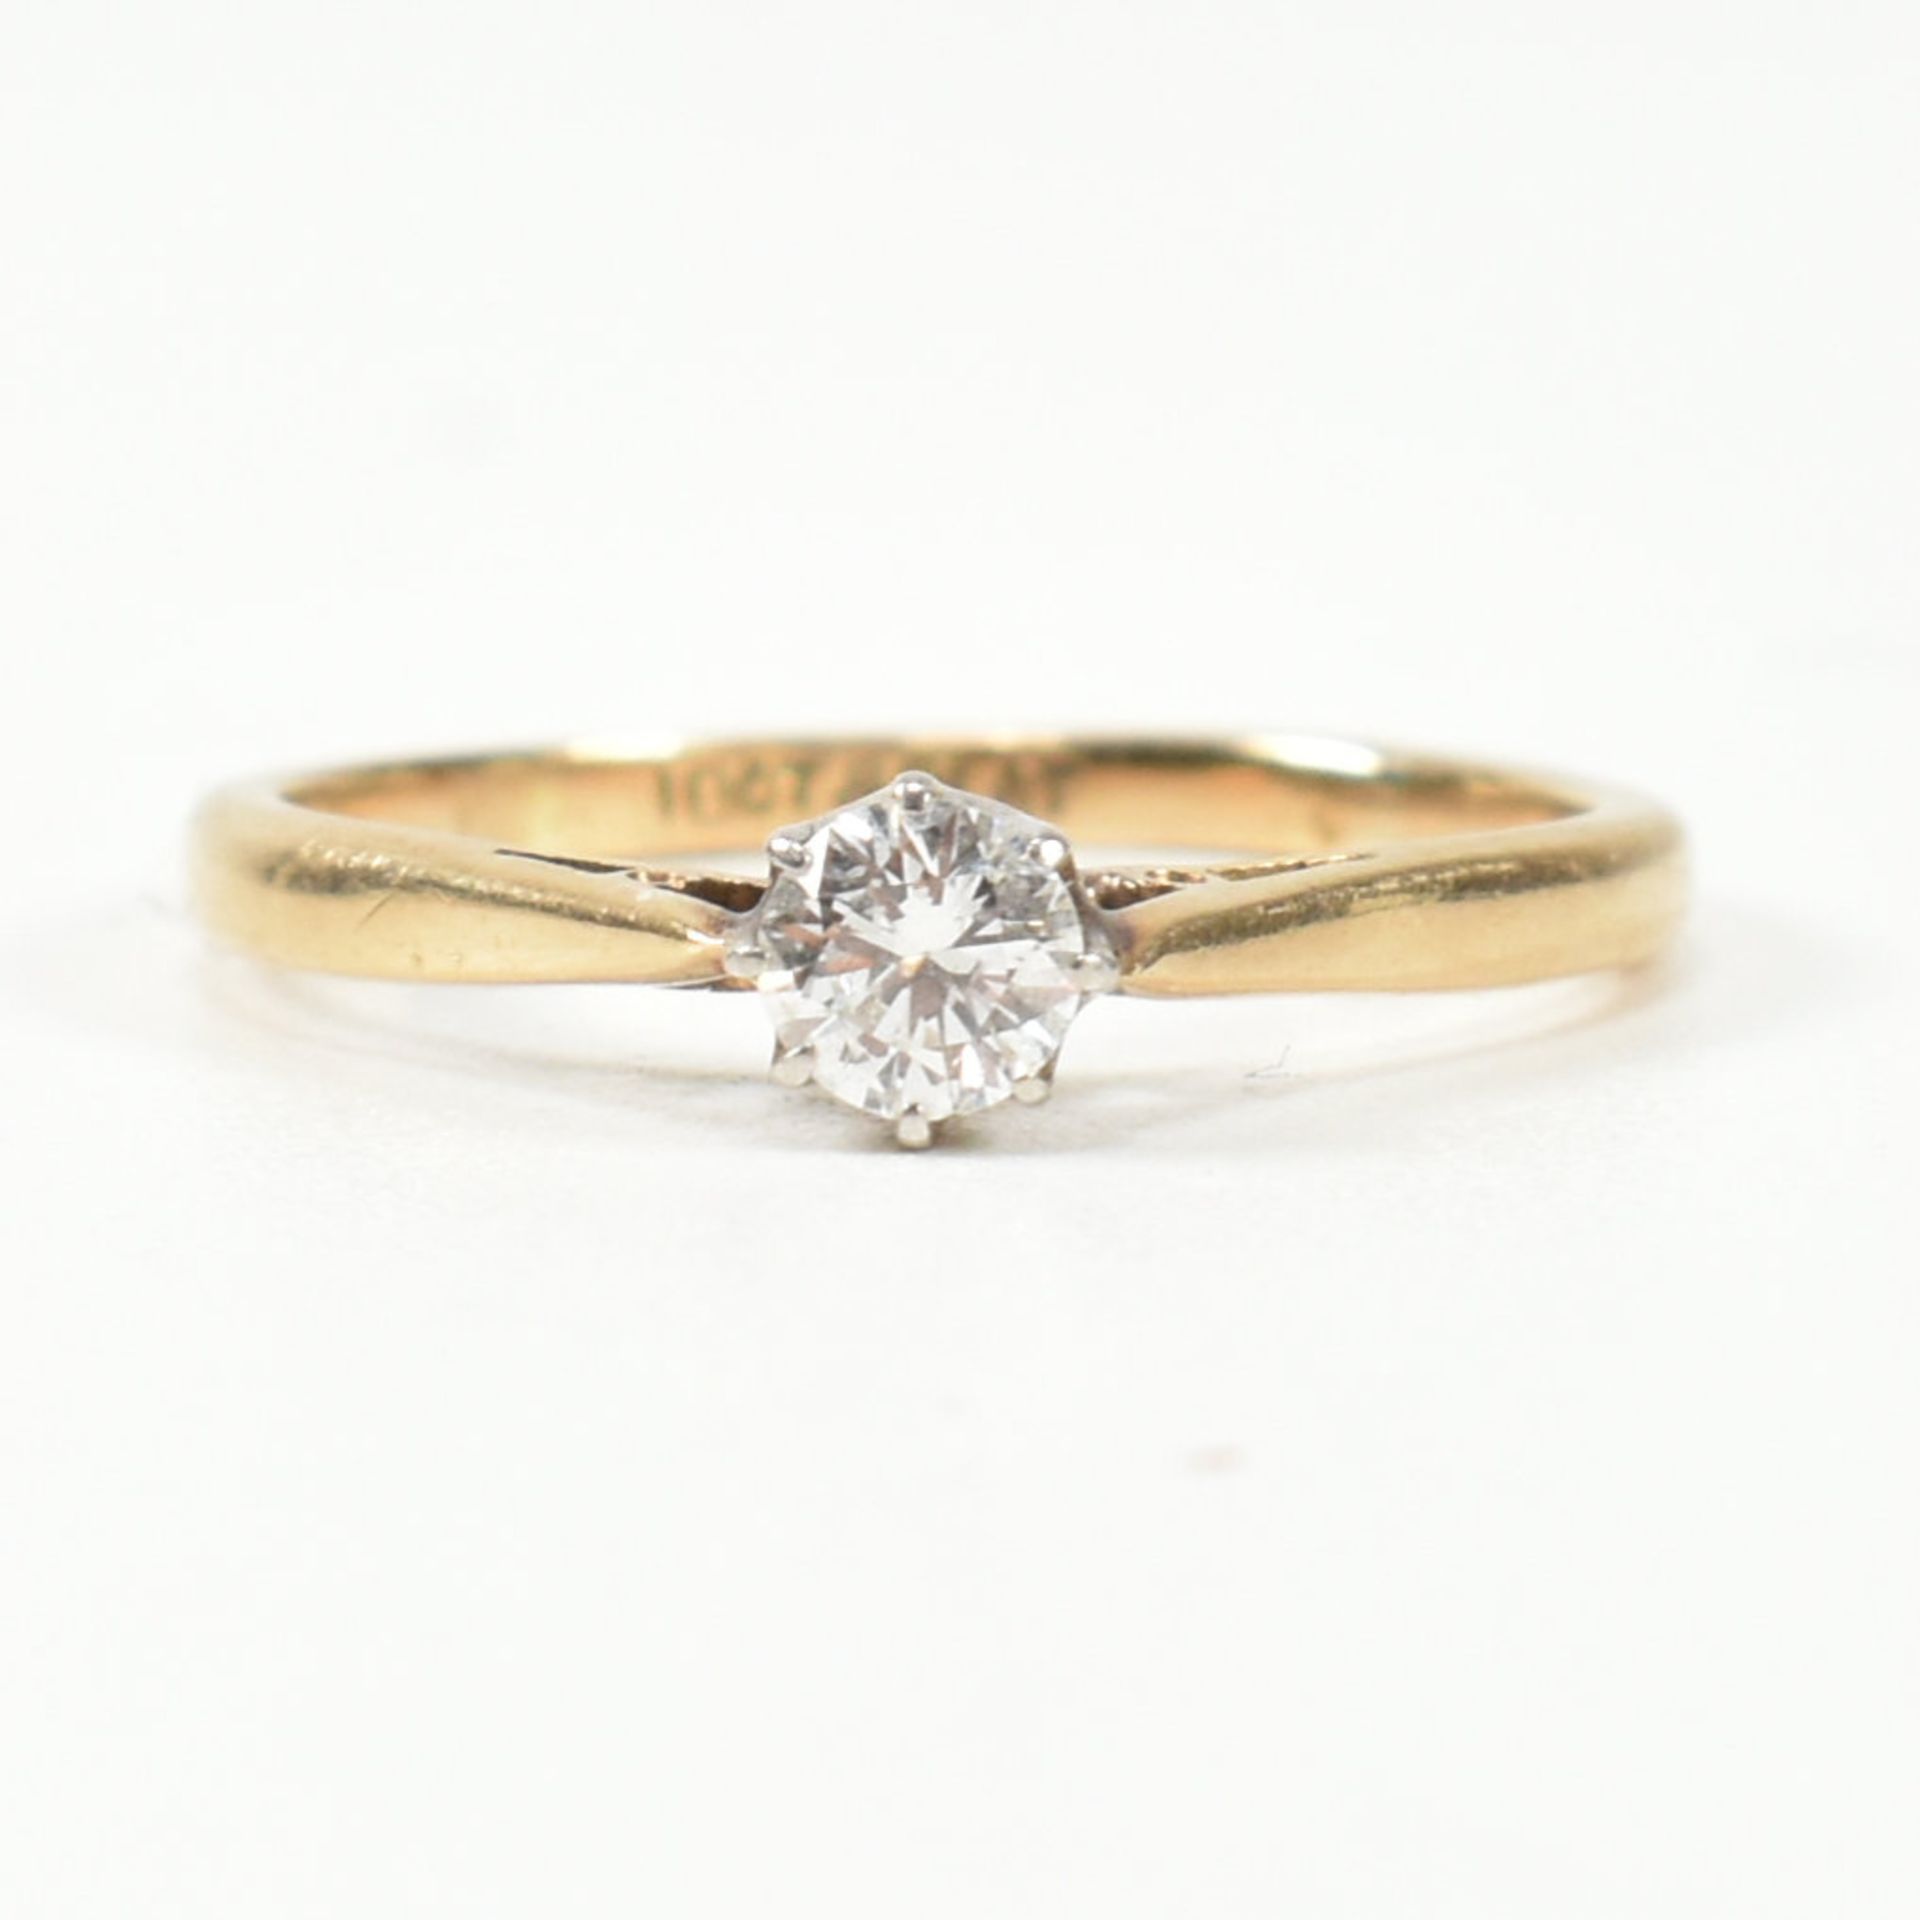 18CT GOLD & DIAMOND SOLITAIRE RING - Image 2 of 8